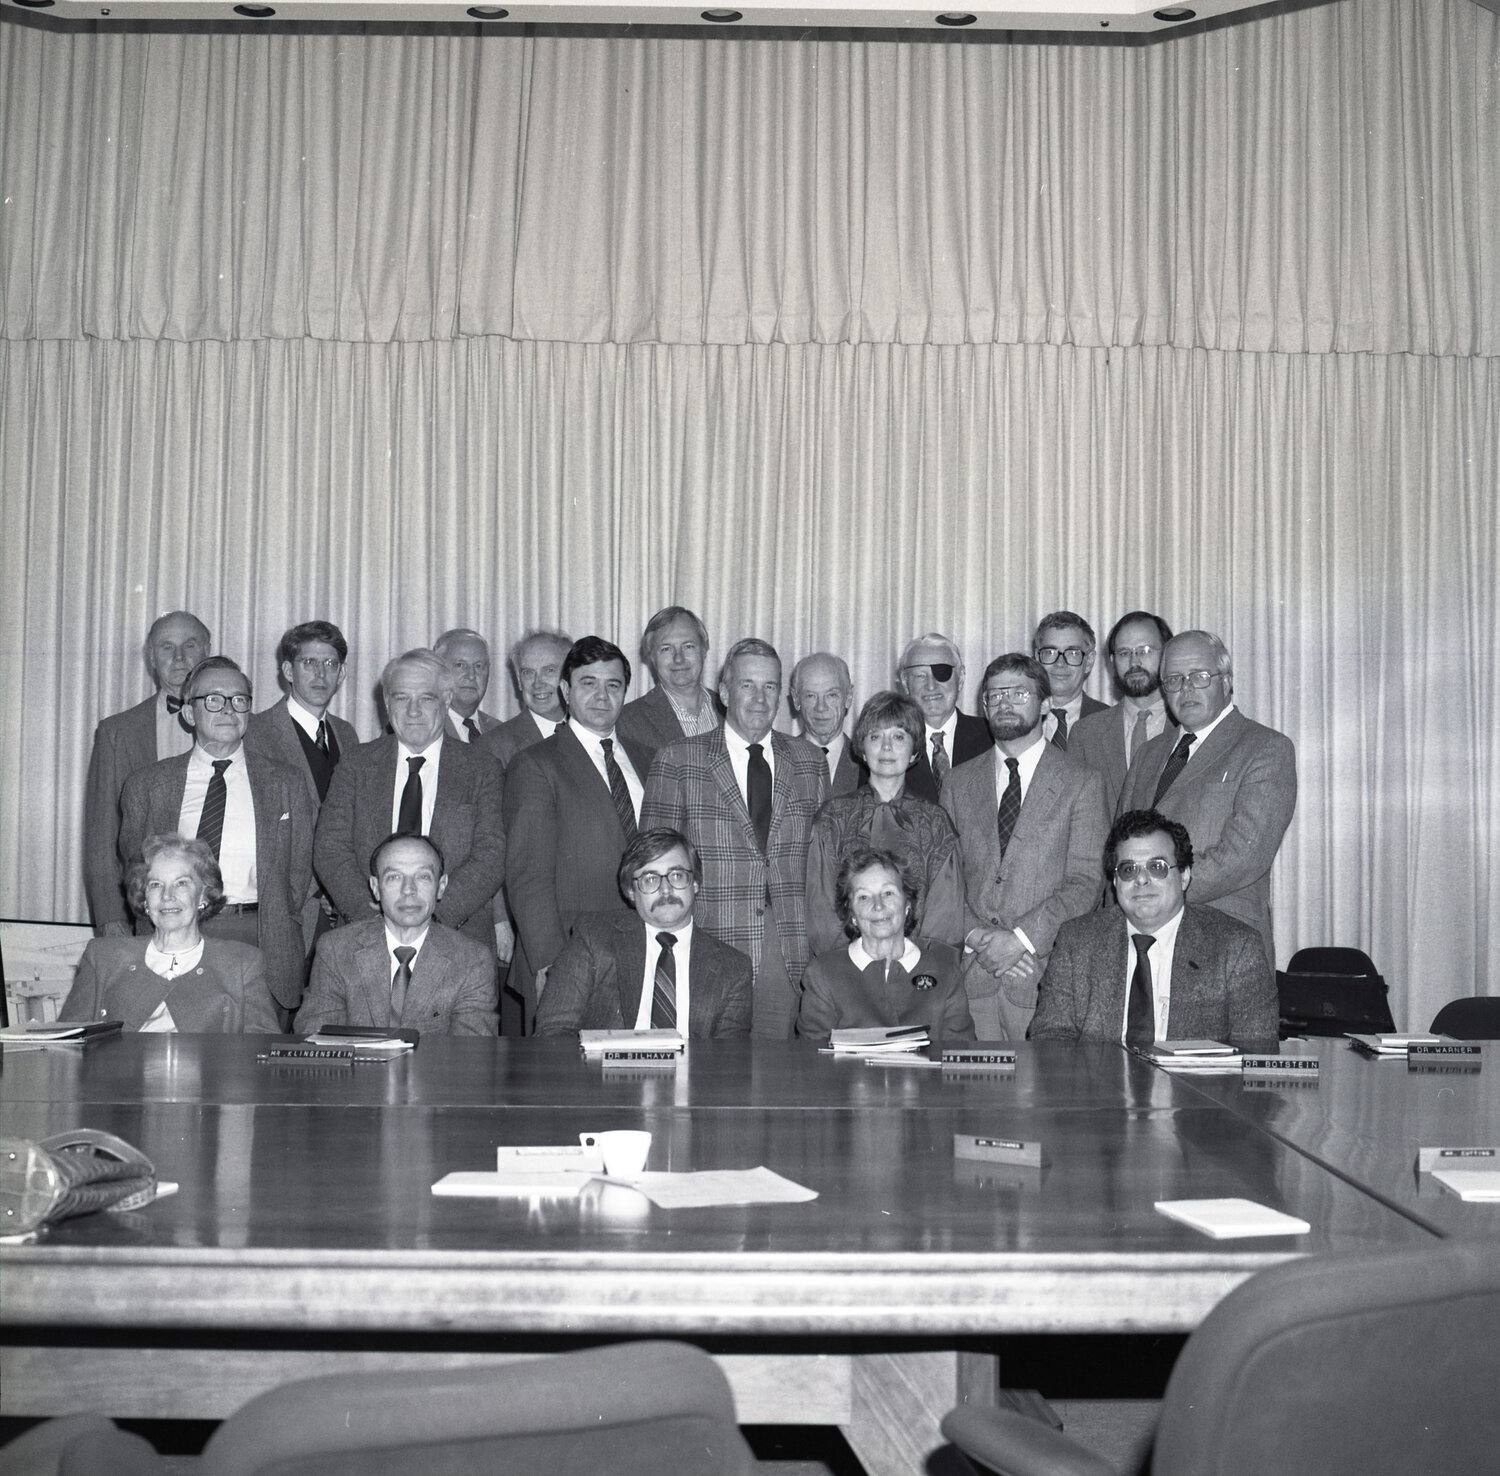 Helen Dolan, third from right, standing, served on the board of directors for Cold Spring Harbor Laboratory in 1987.